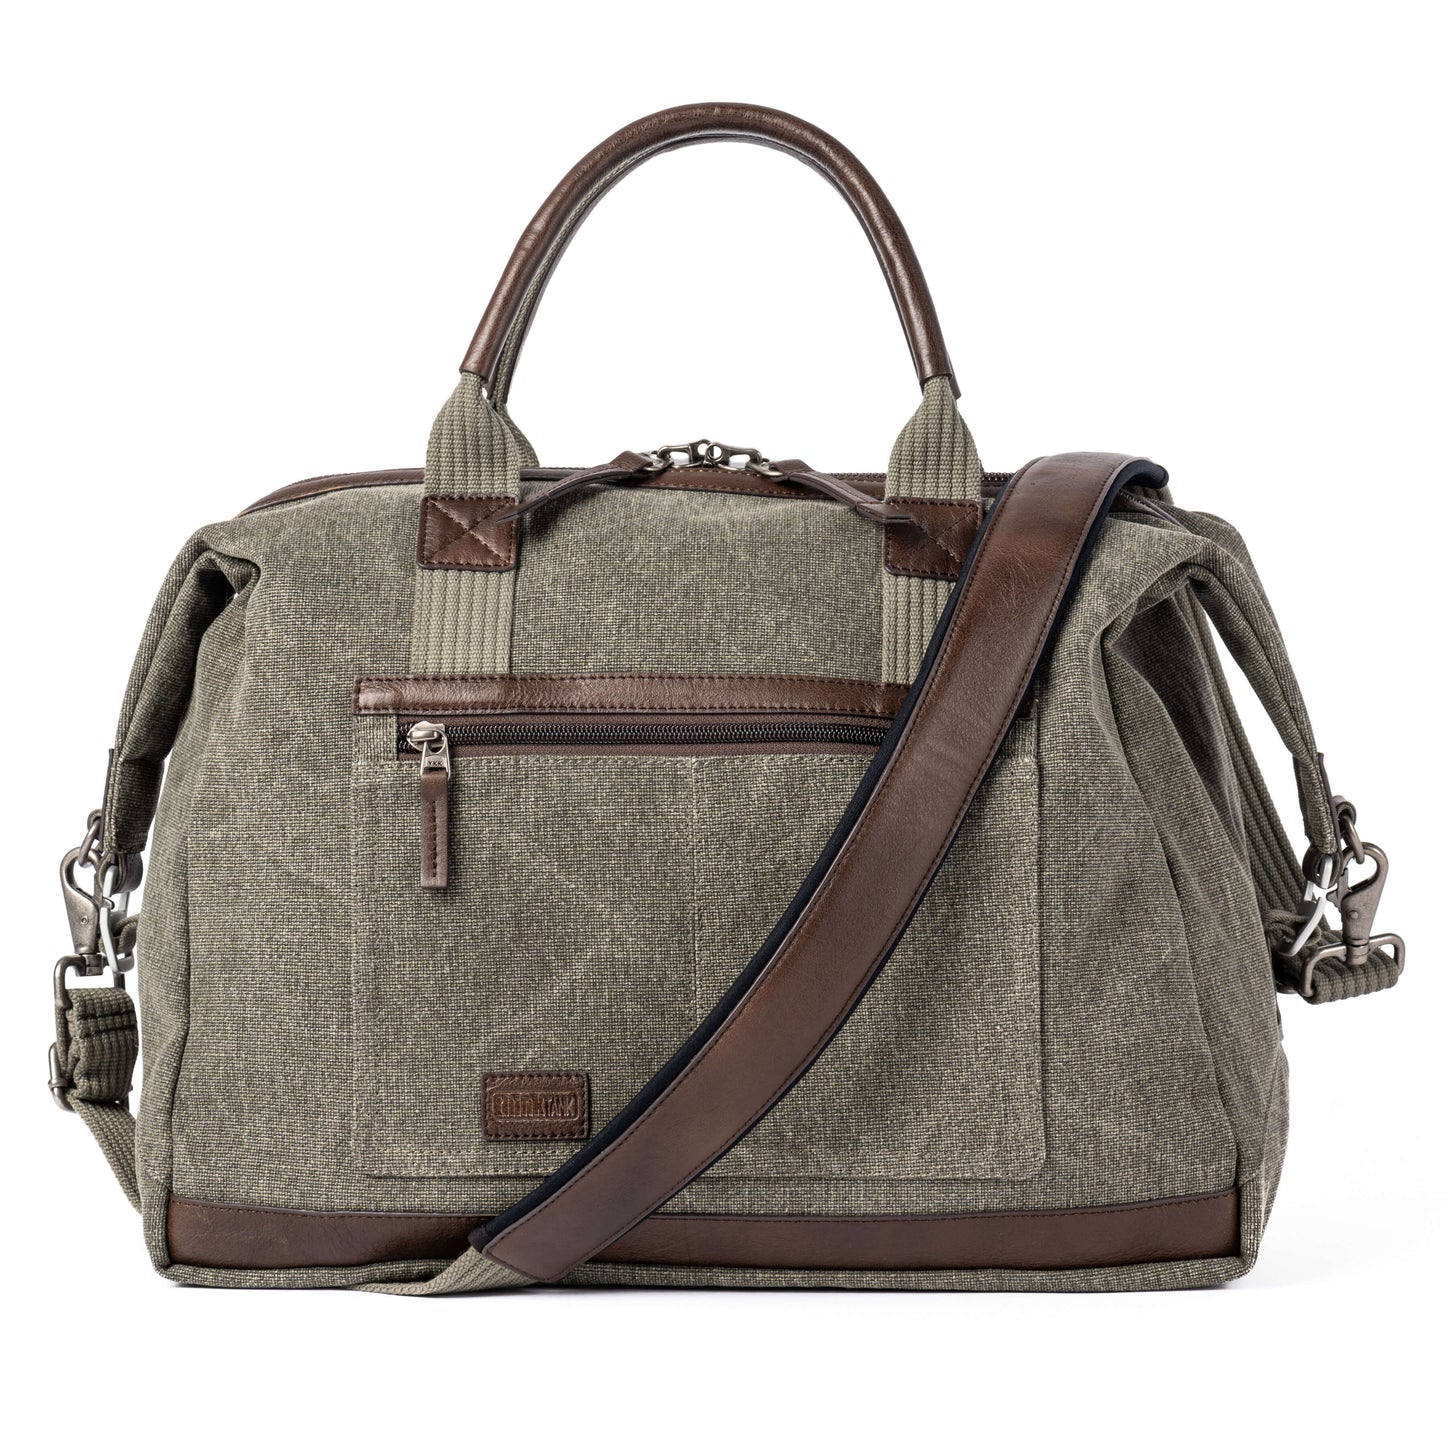 Classic weekender soft-sided construction with full-length straight zippered access to the main compartment